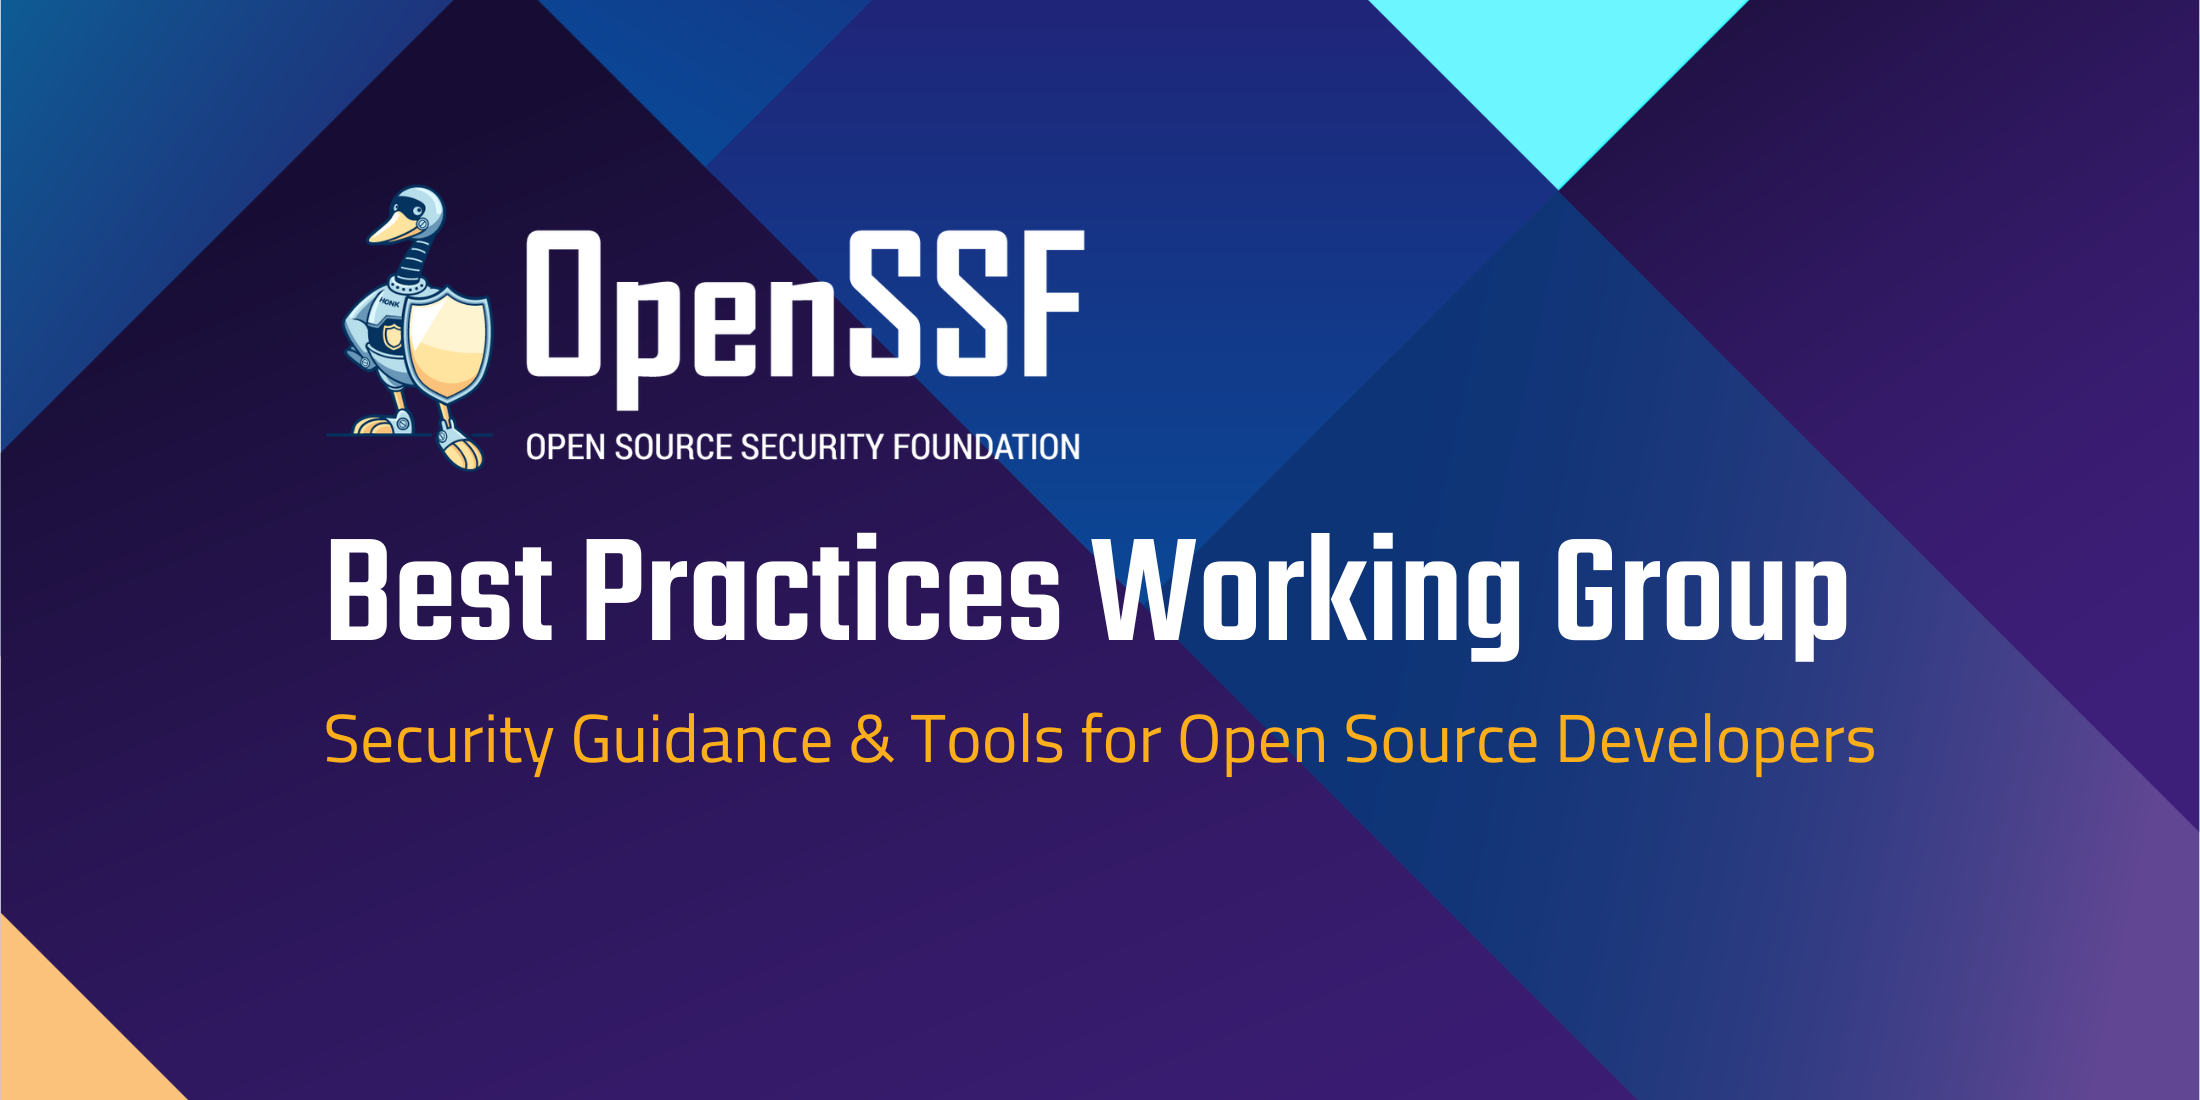 OpenSSF Best Practices Working Group